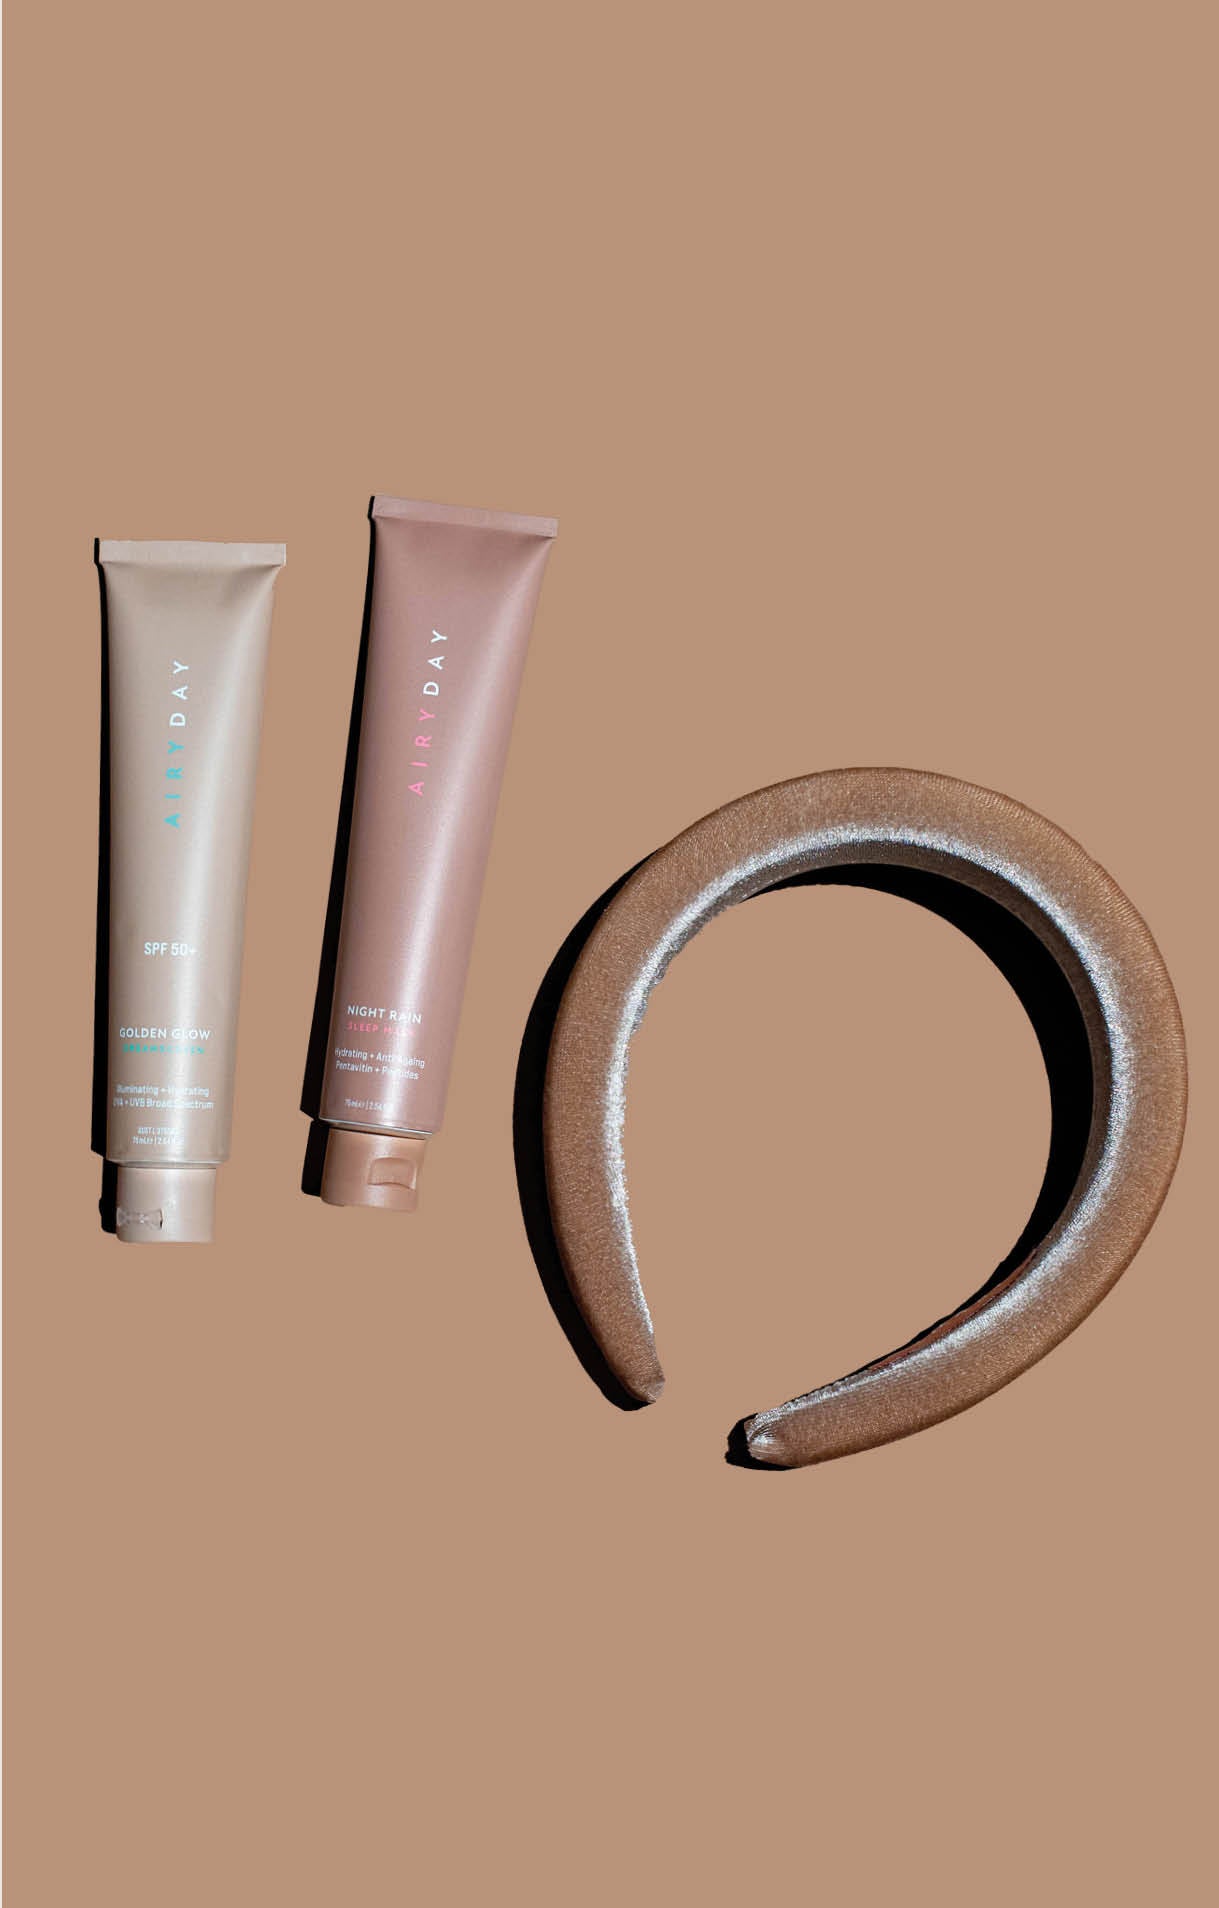 GLOW + NIGHT DUO SET + SMOOTH HEADBAND "MOTHER'S DAY EDITION"